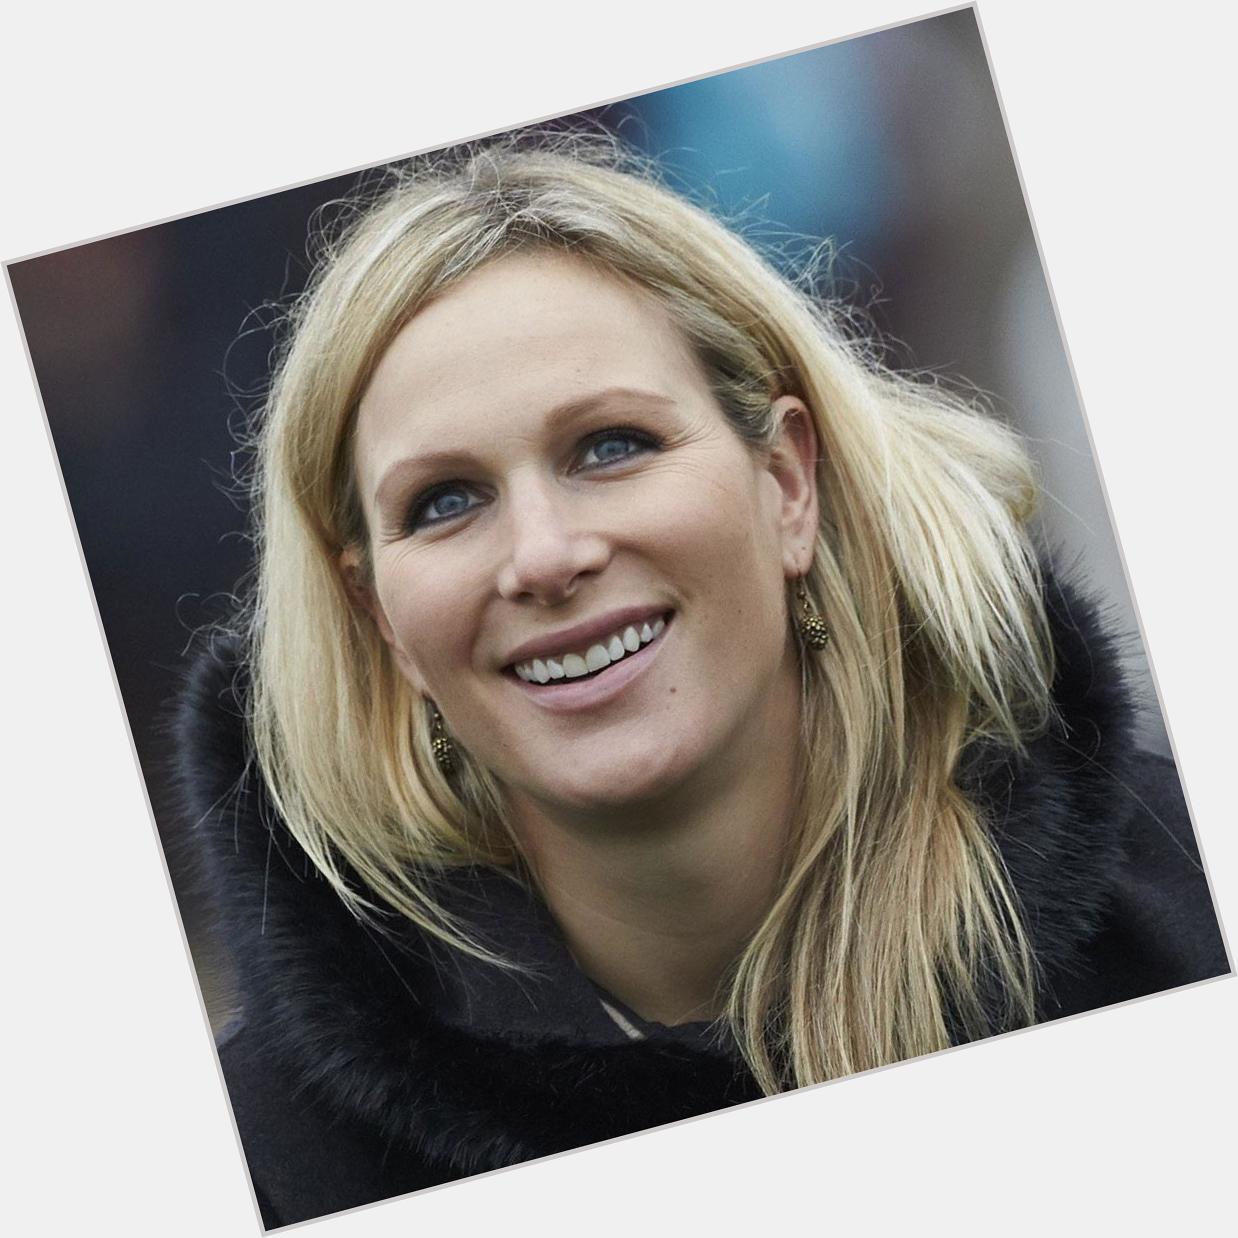 We wish happy birthday to Zara Phillips, daughter of Her Royal Highness Princess Anne 